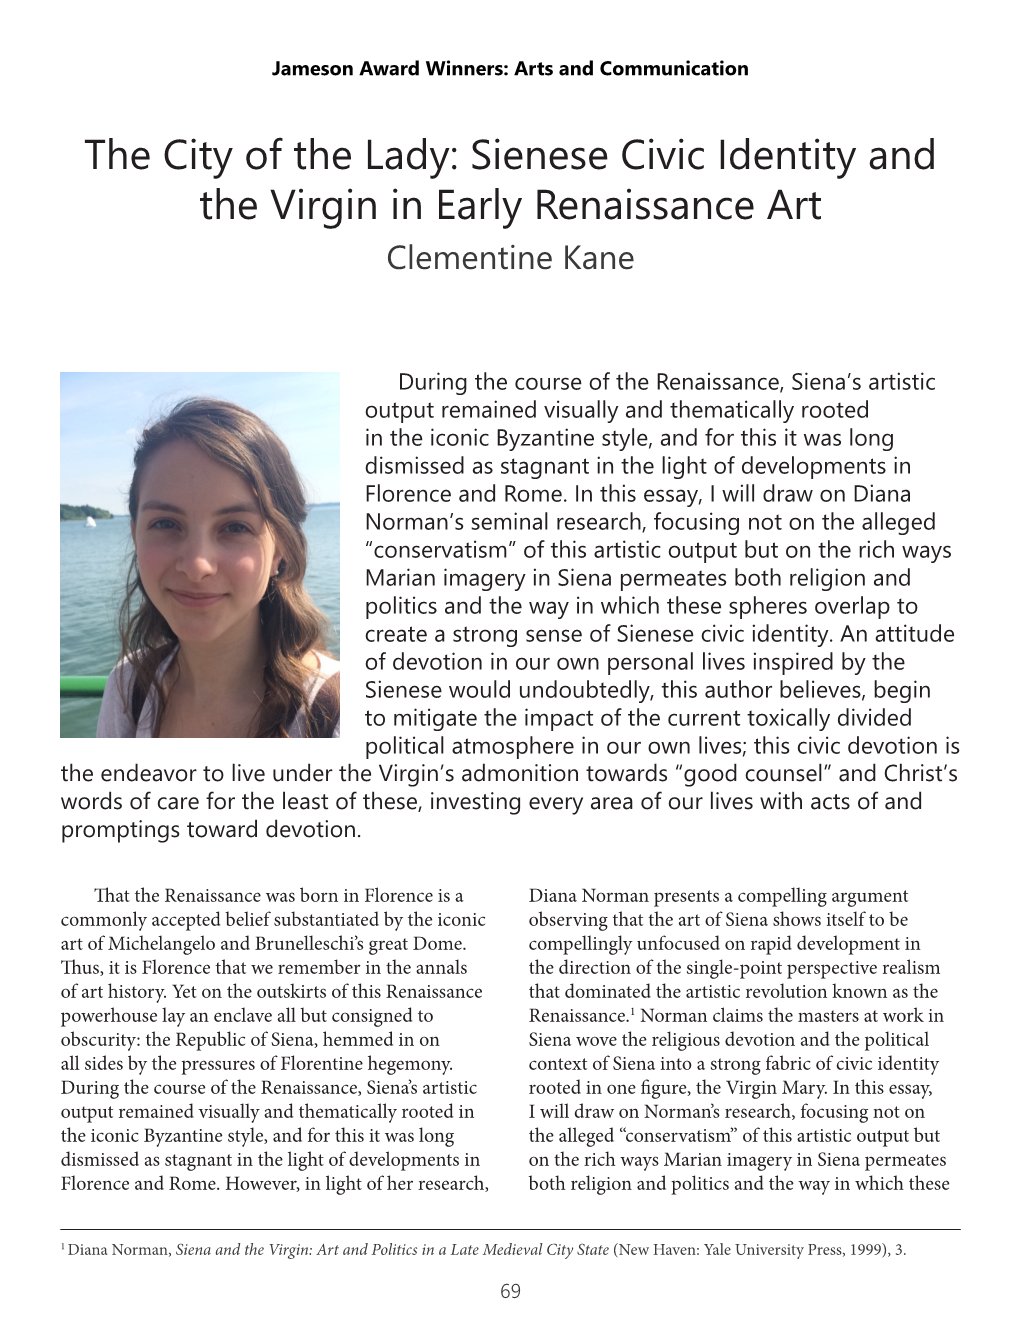 Sienese Civic Identity and the Virgin in Early Renaissance Art Clementine Kane